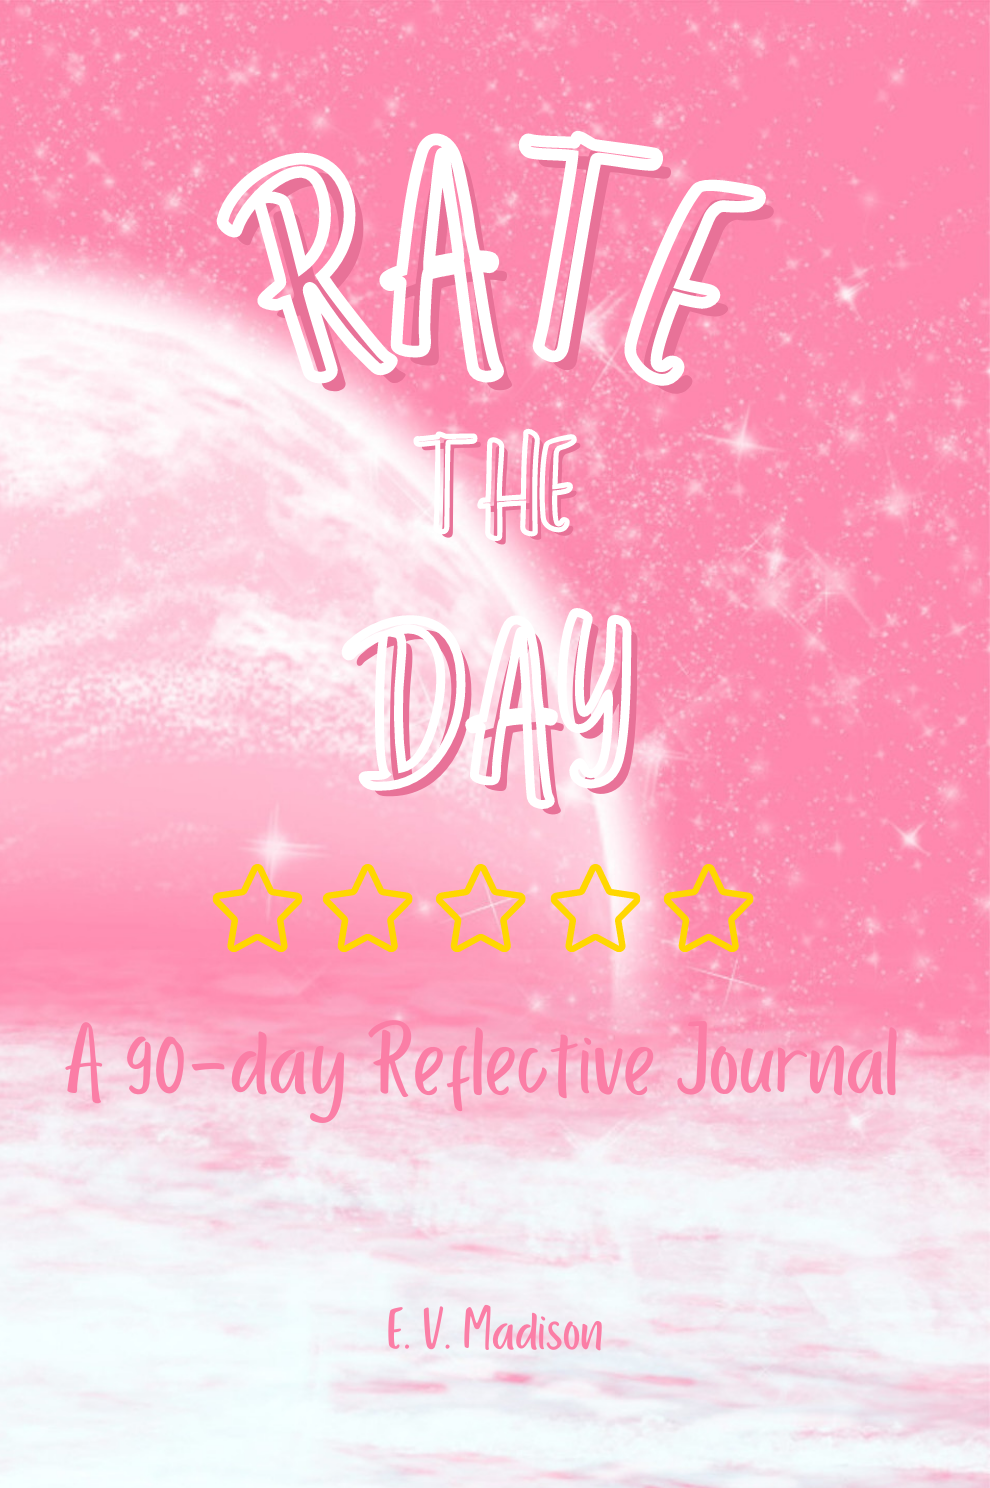 Rate the Day: A 90-Day Reflective Journal - Ultra Pink Edition